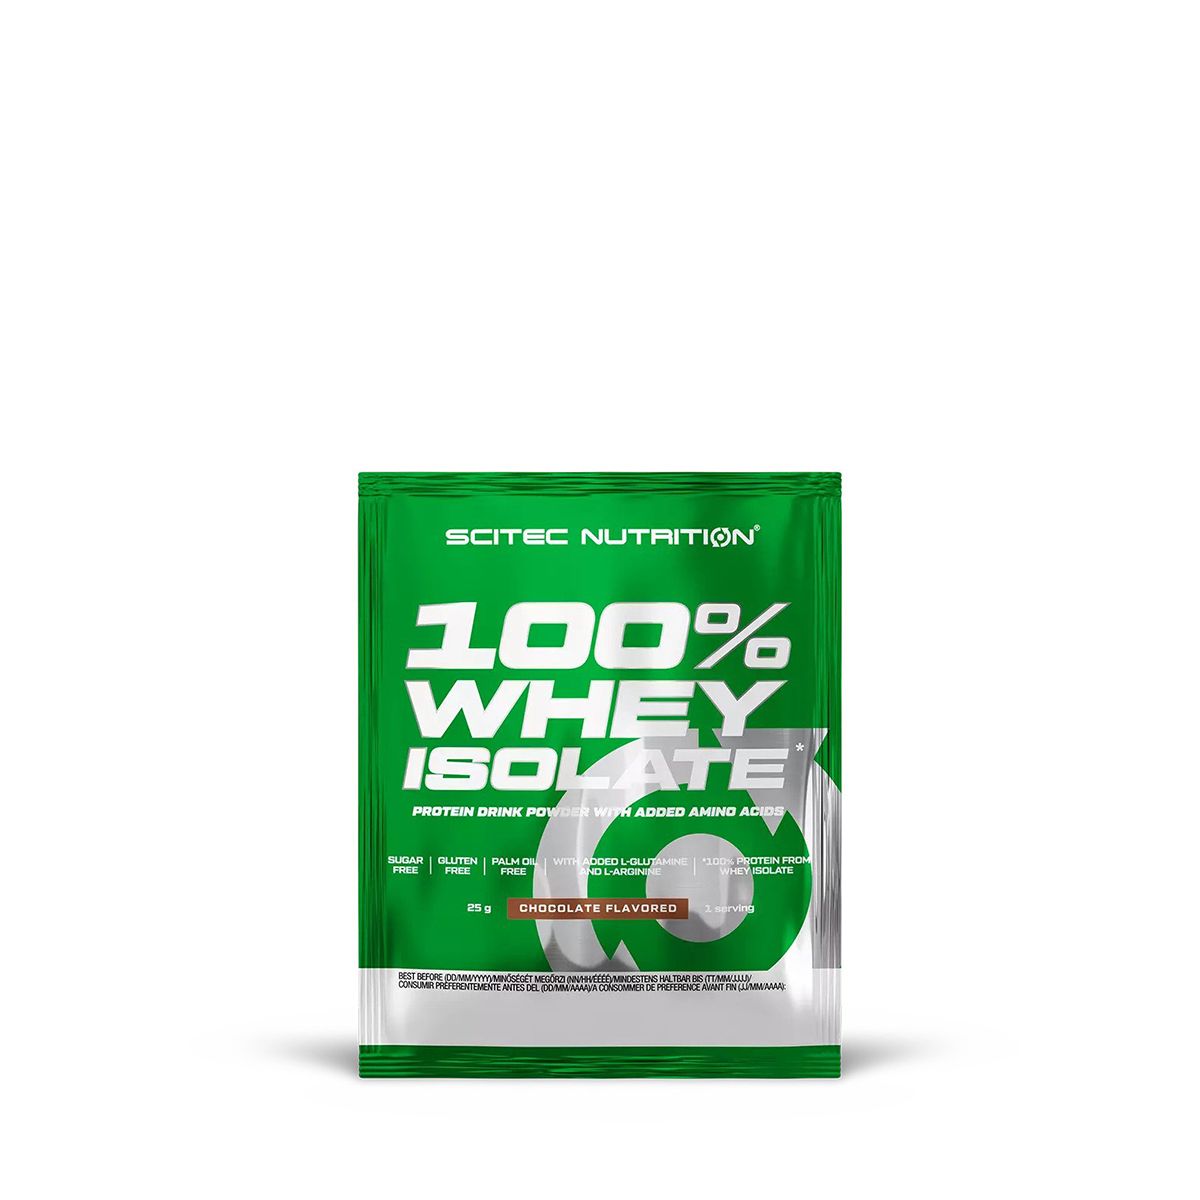 SCITEC NUTRITION - 100% WHEY ISOLATE - 25 G